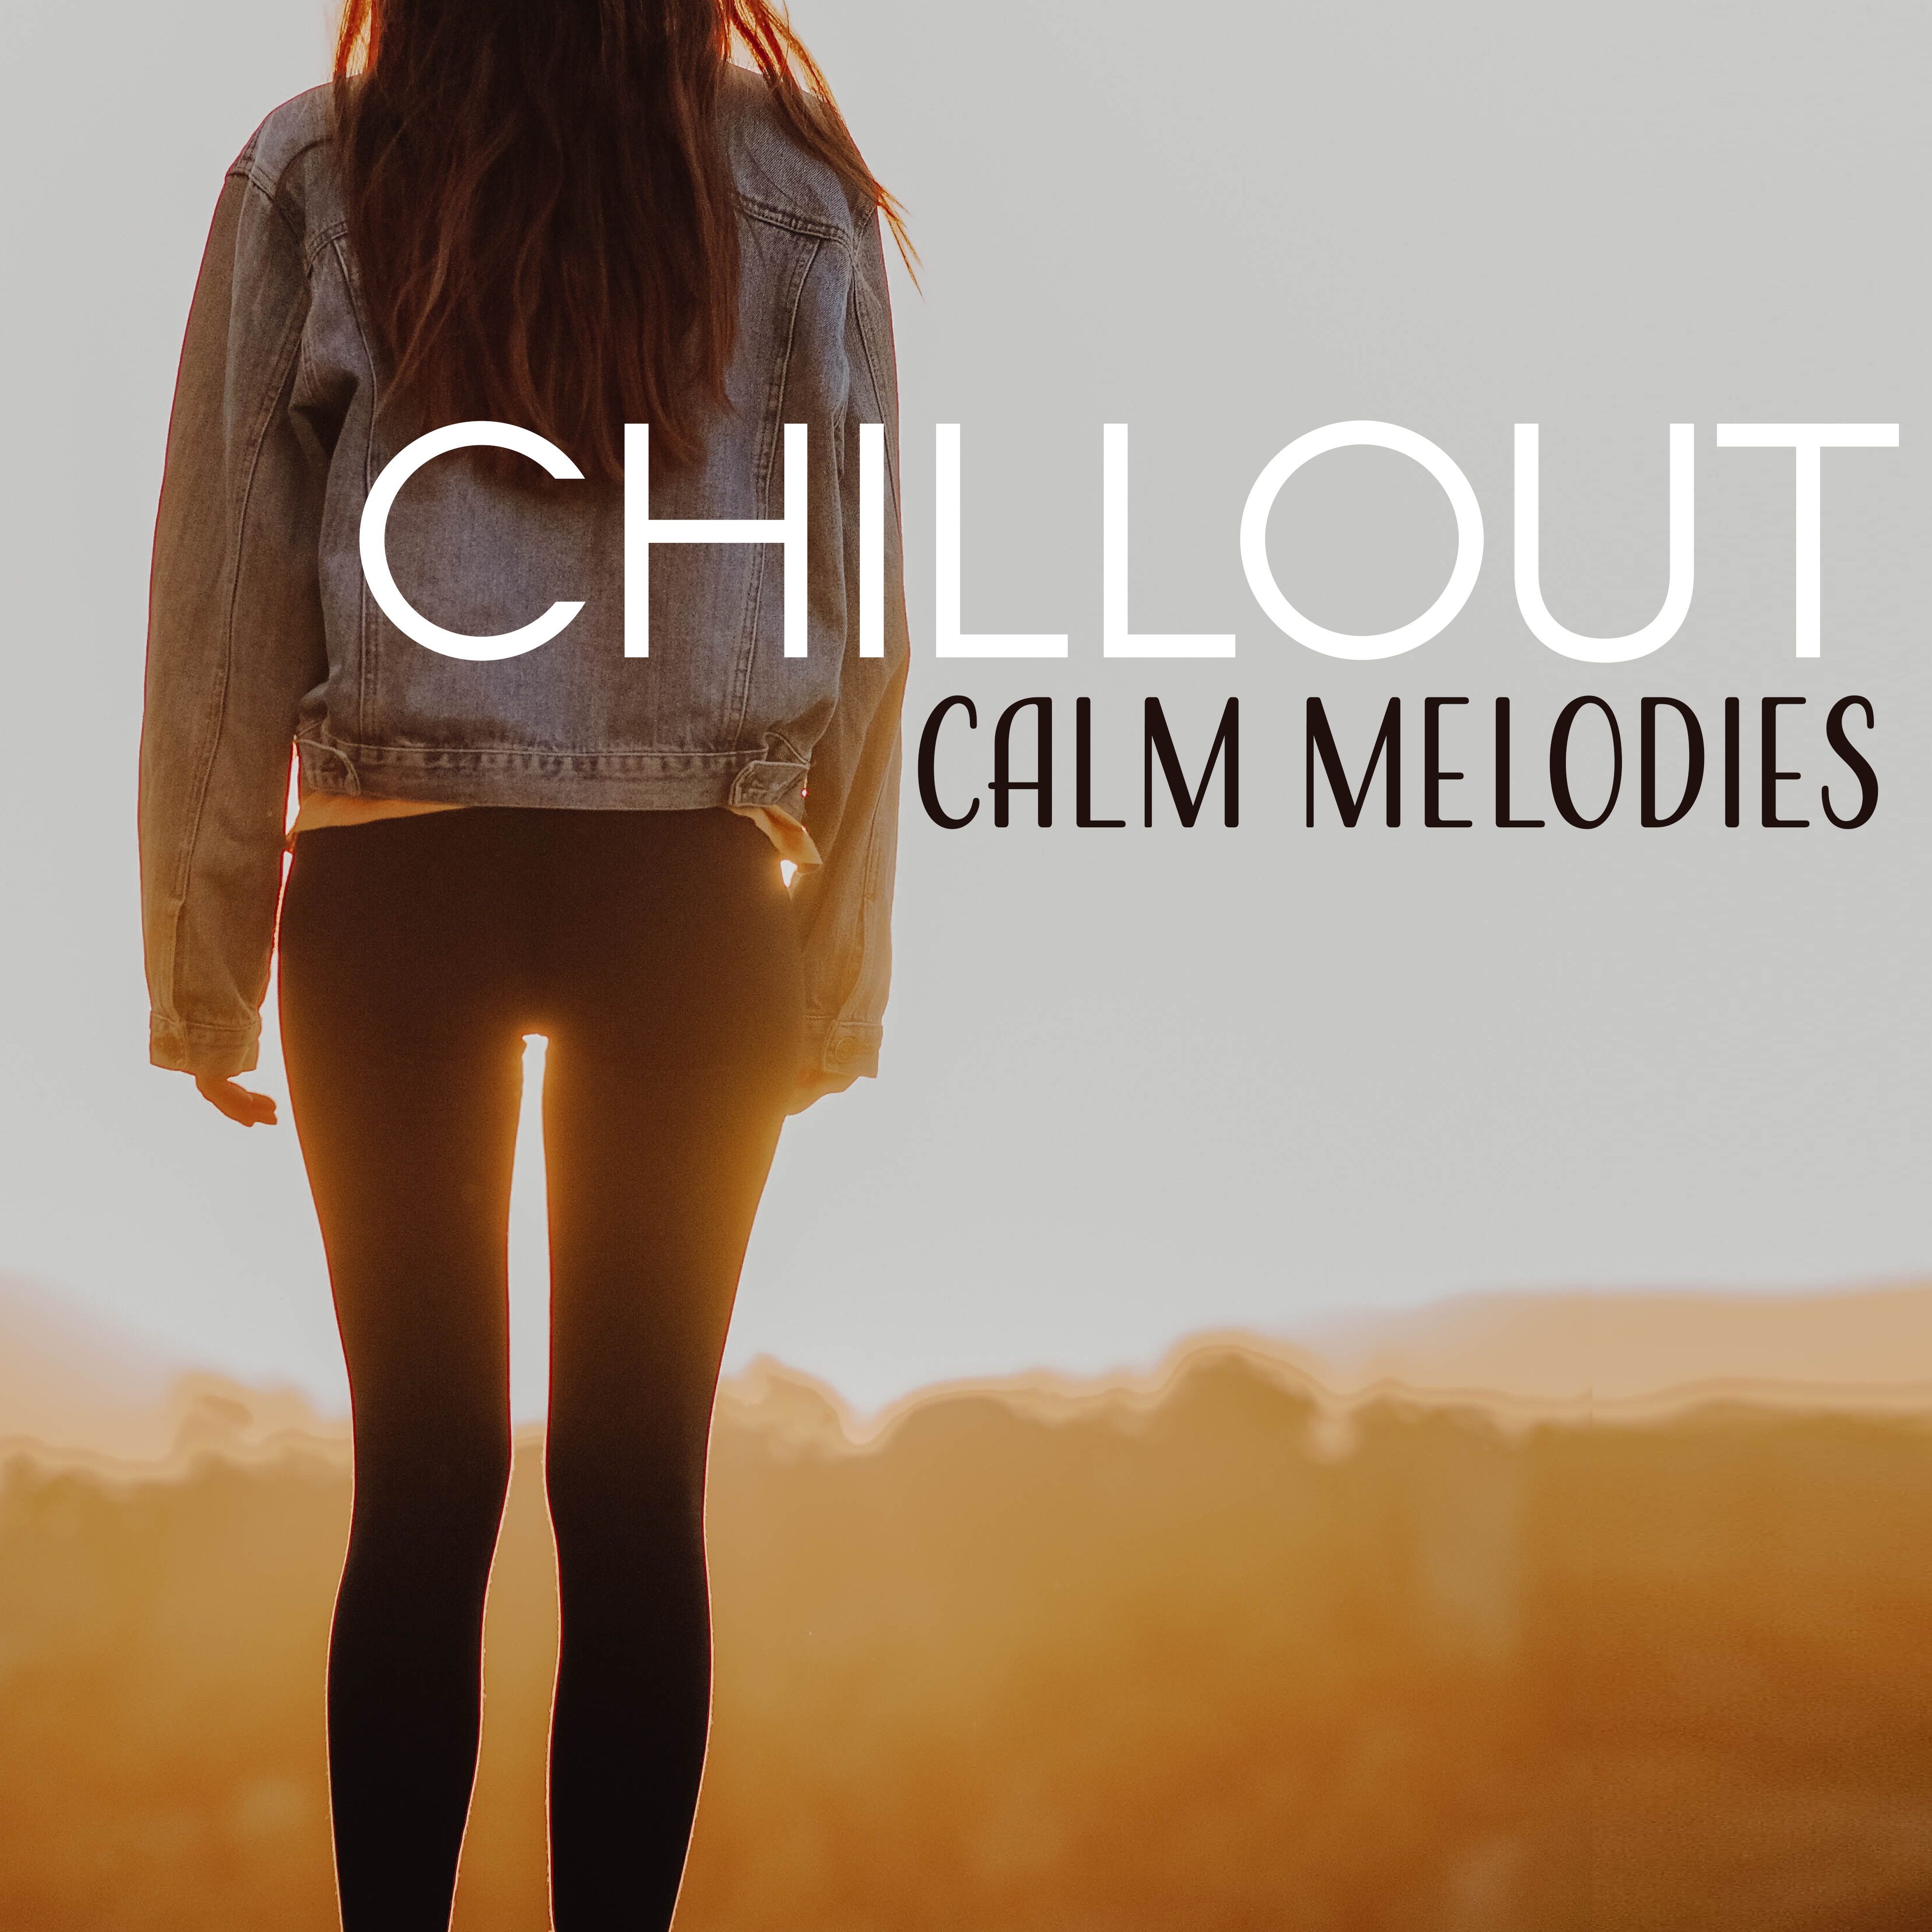 Chillout Calm Melodies